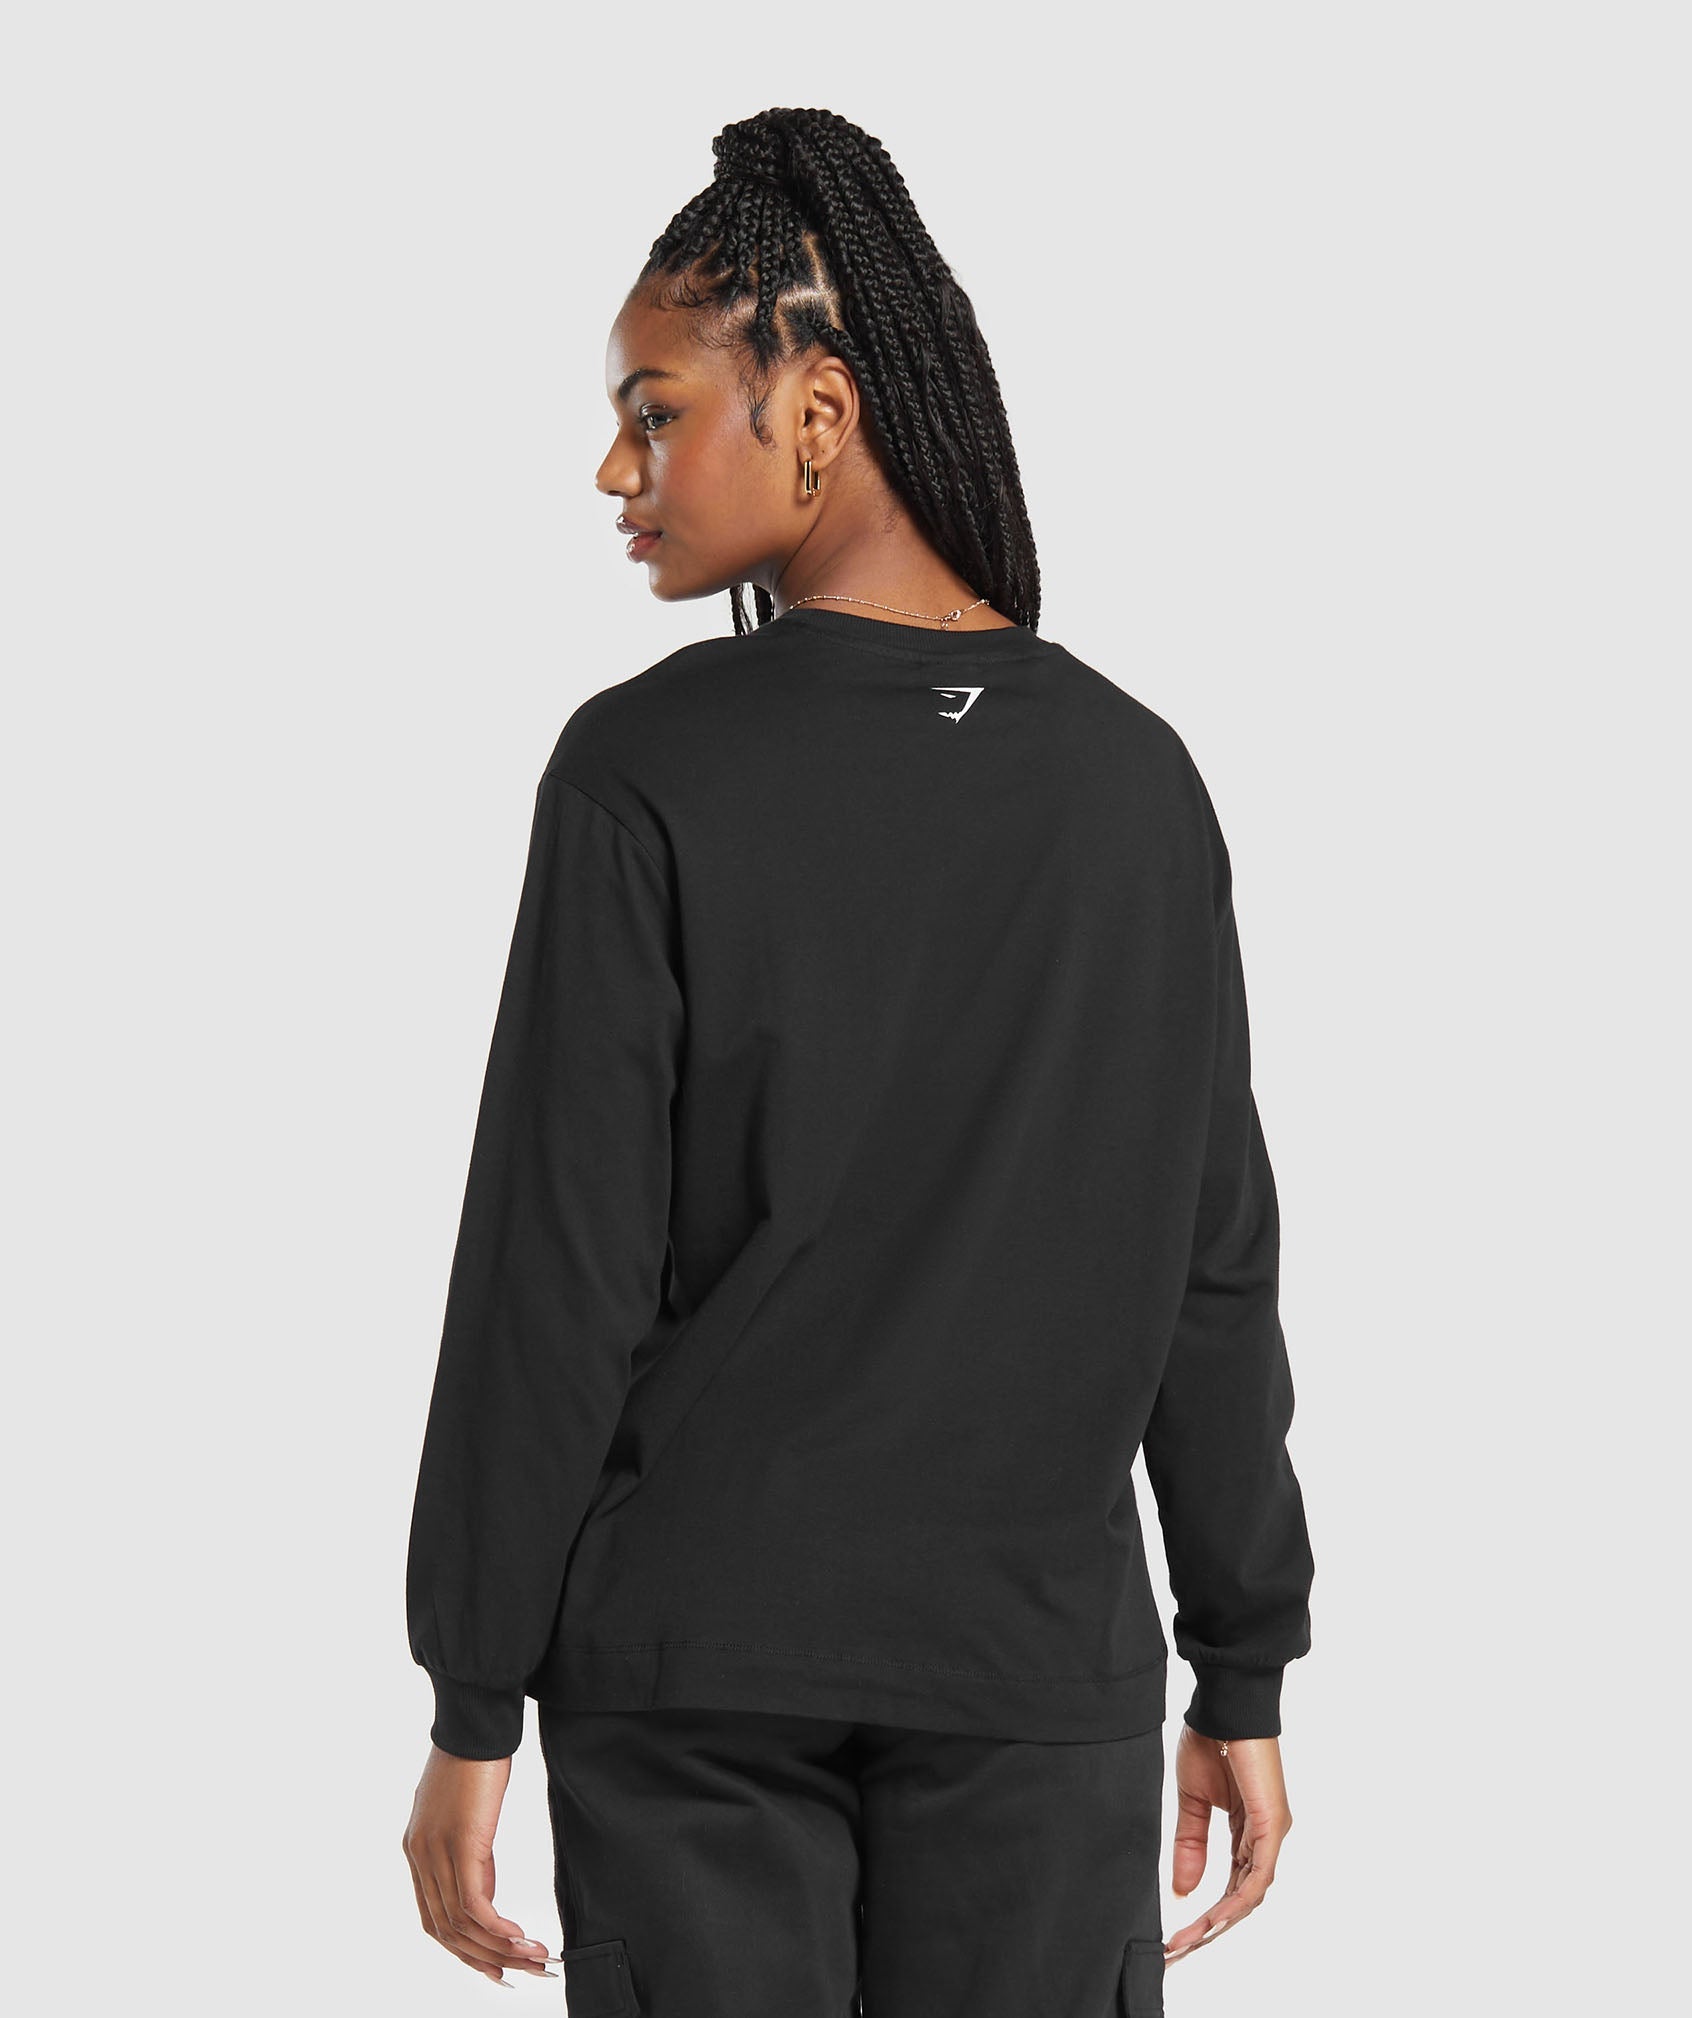 Gymshark Committed To The Craft Long Sleeve Top - Black